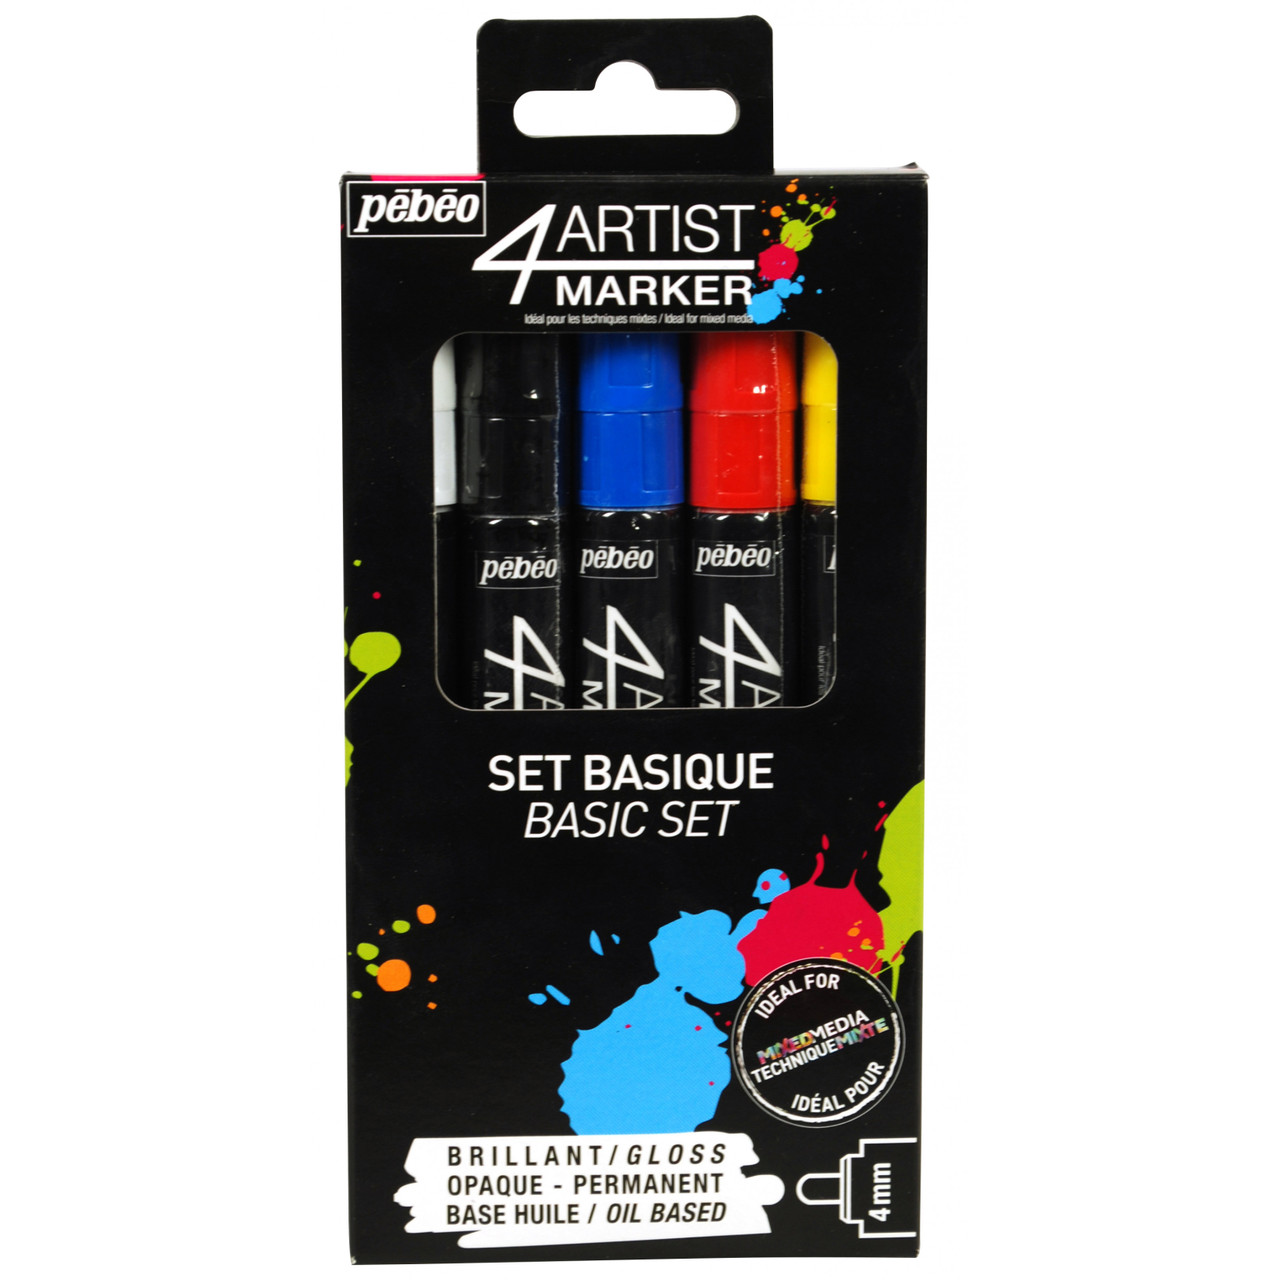 Pebeo 4Artist Marker 4mm Set of 5 Assorted Colours